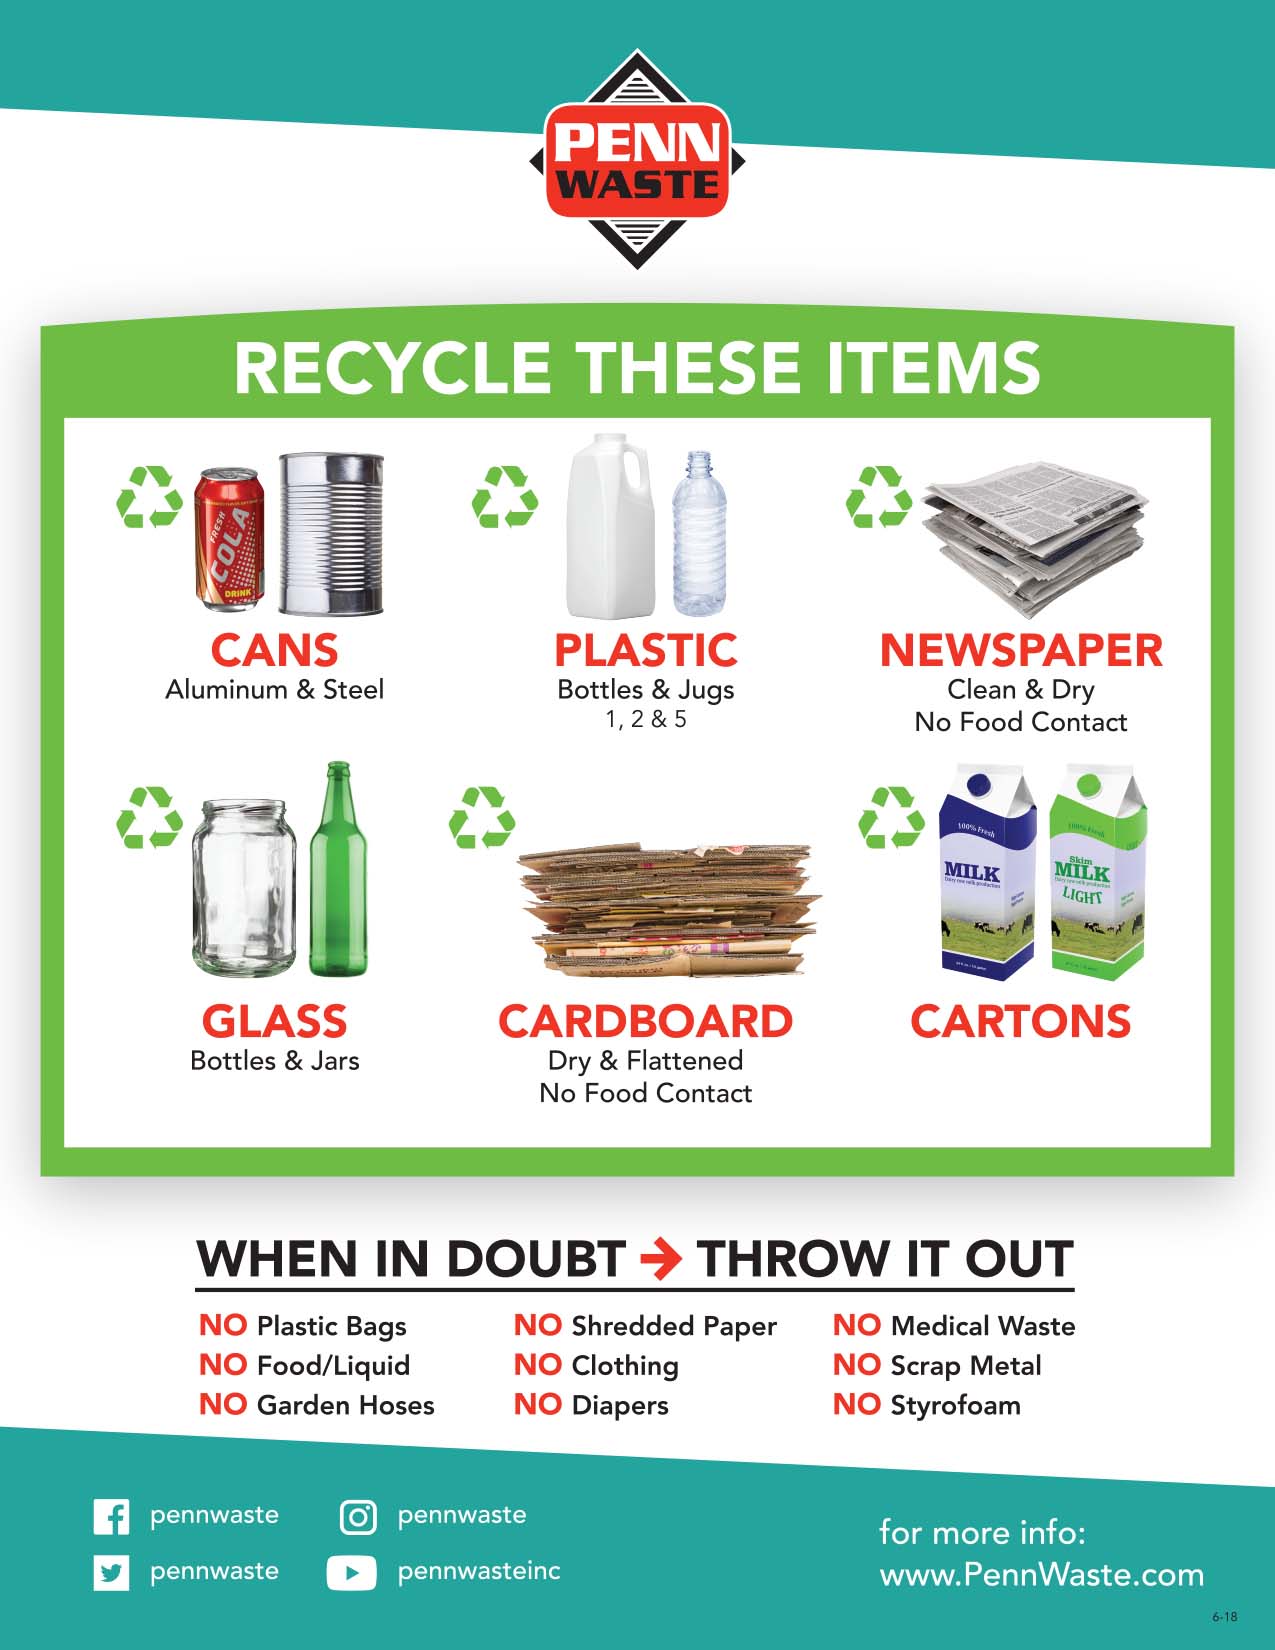 new-recycle-guidelines-penn-waste